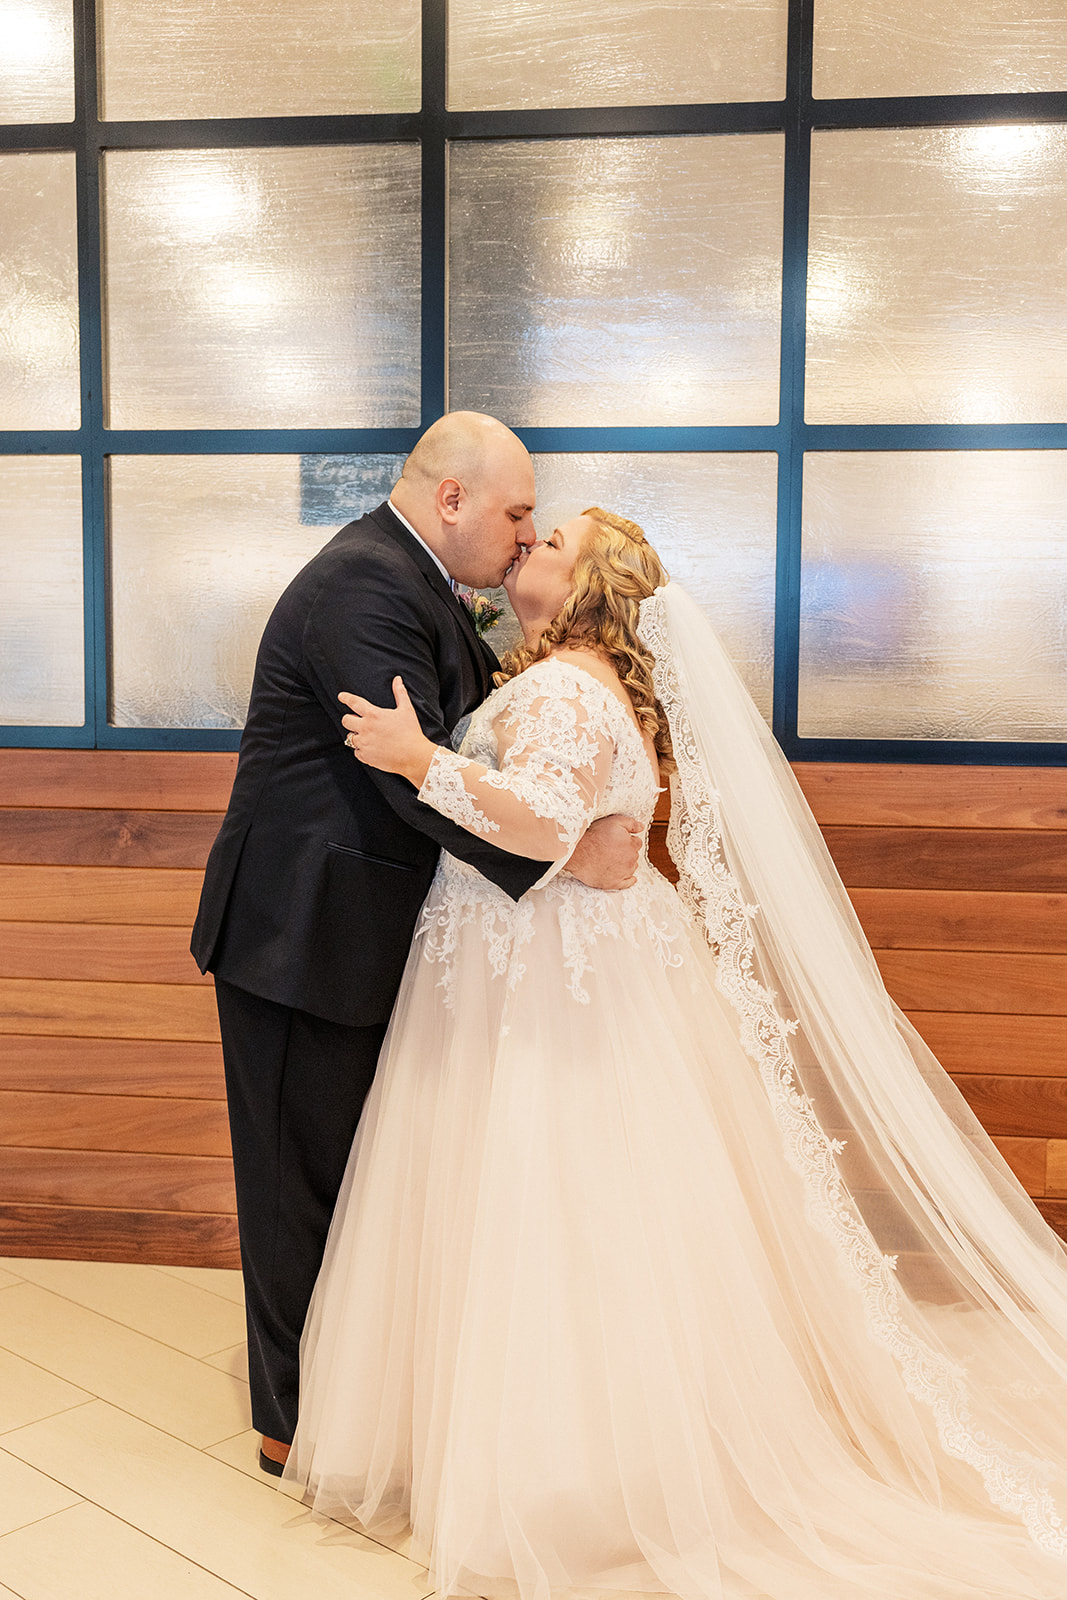 Newlyweds kiss against a wooden wall with windows